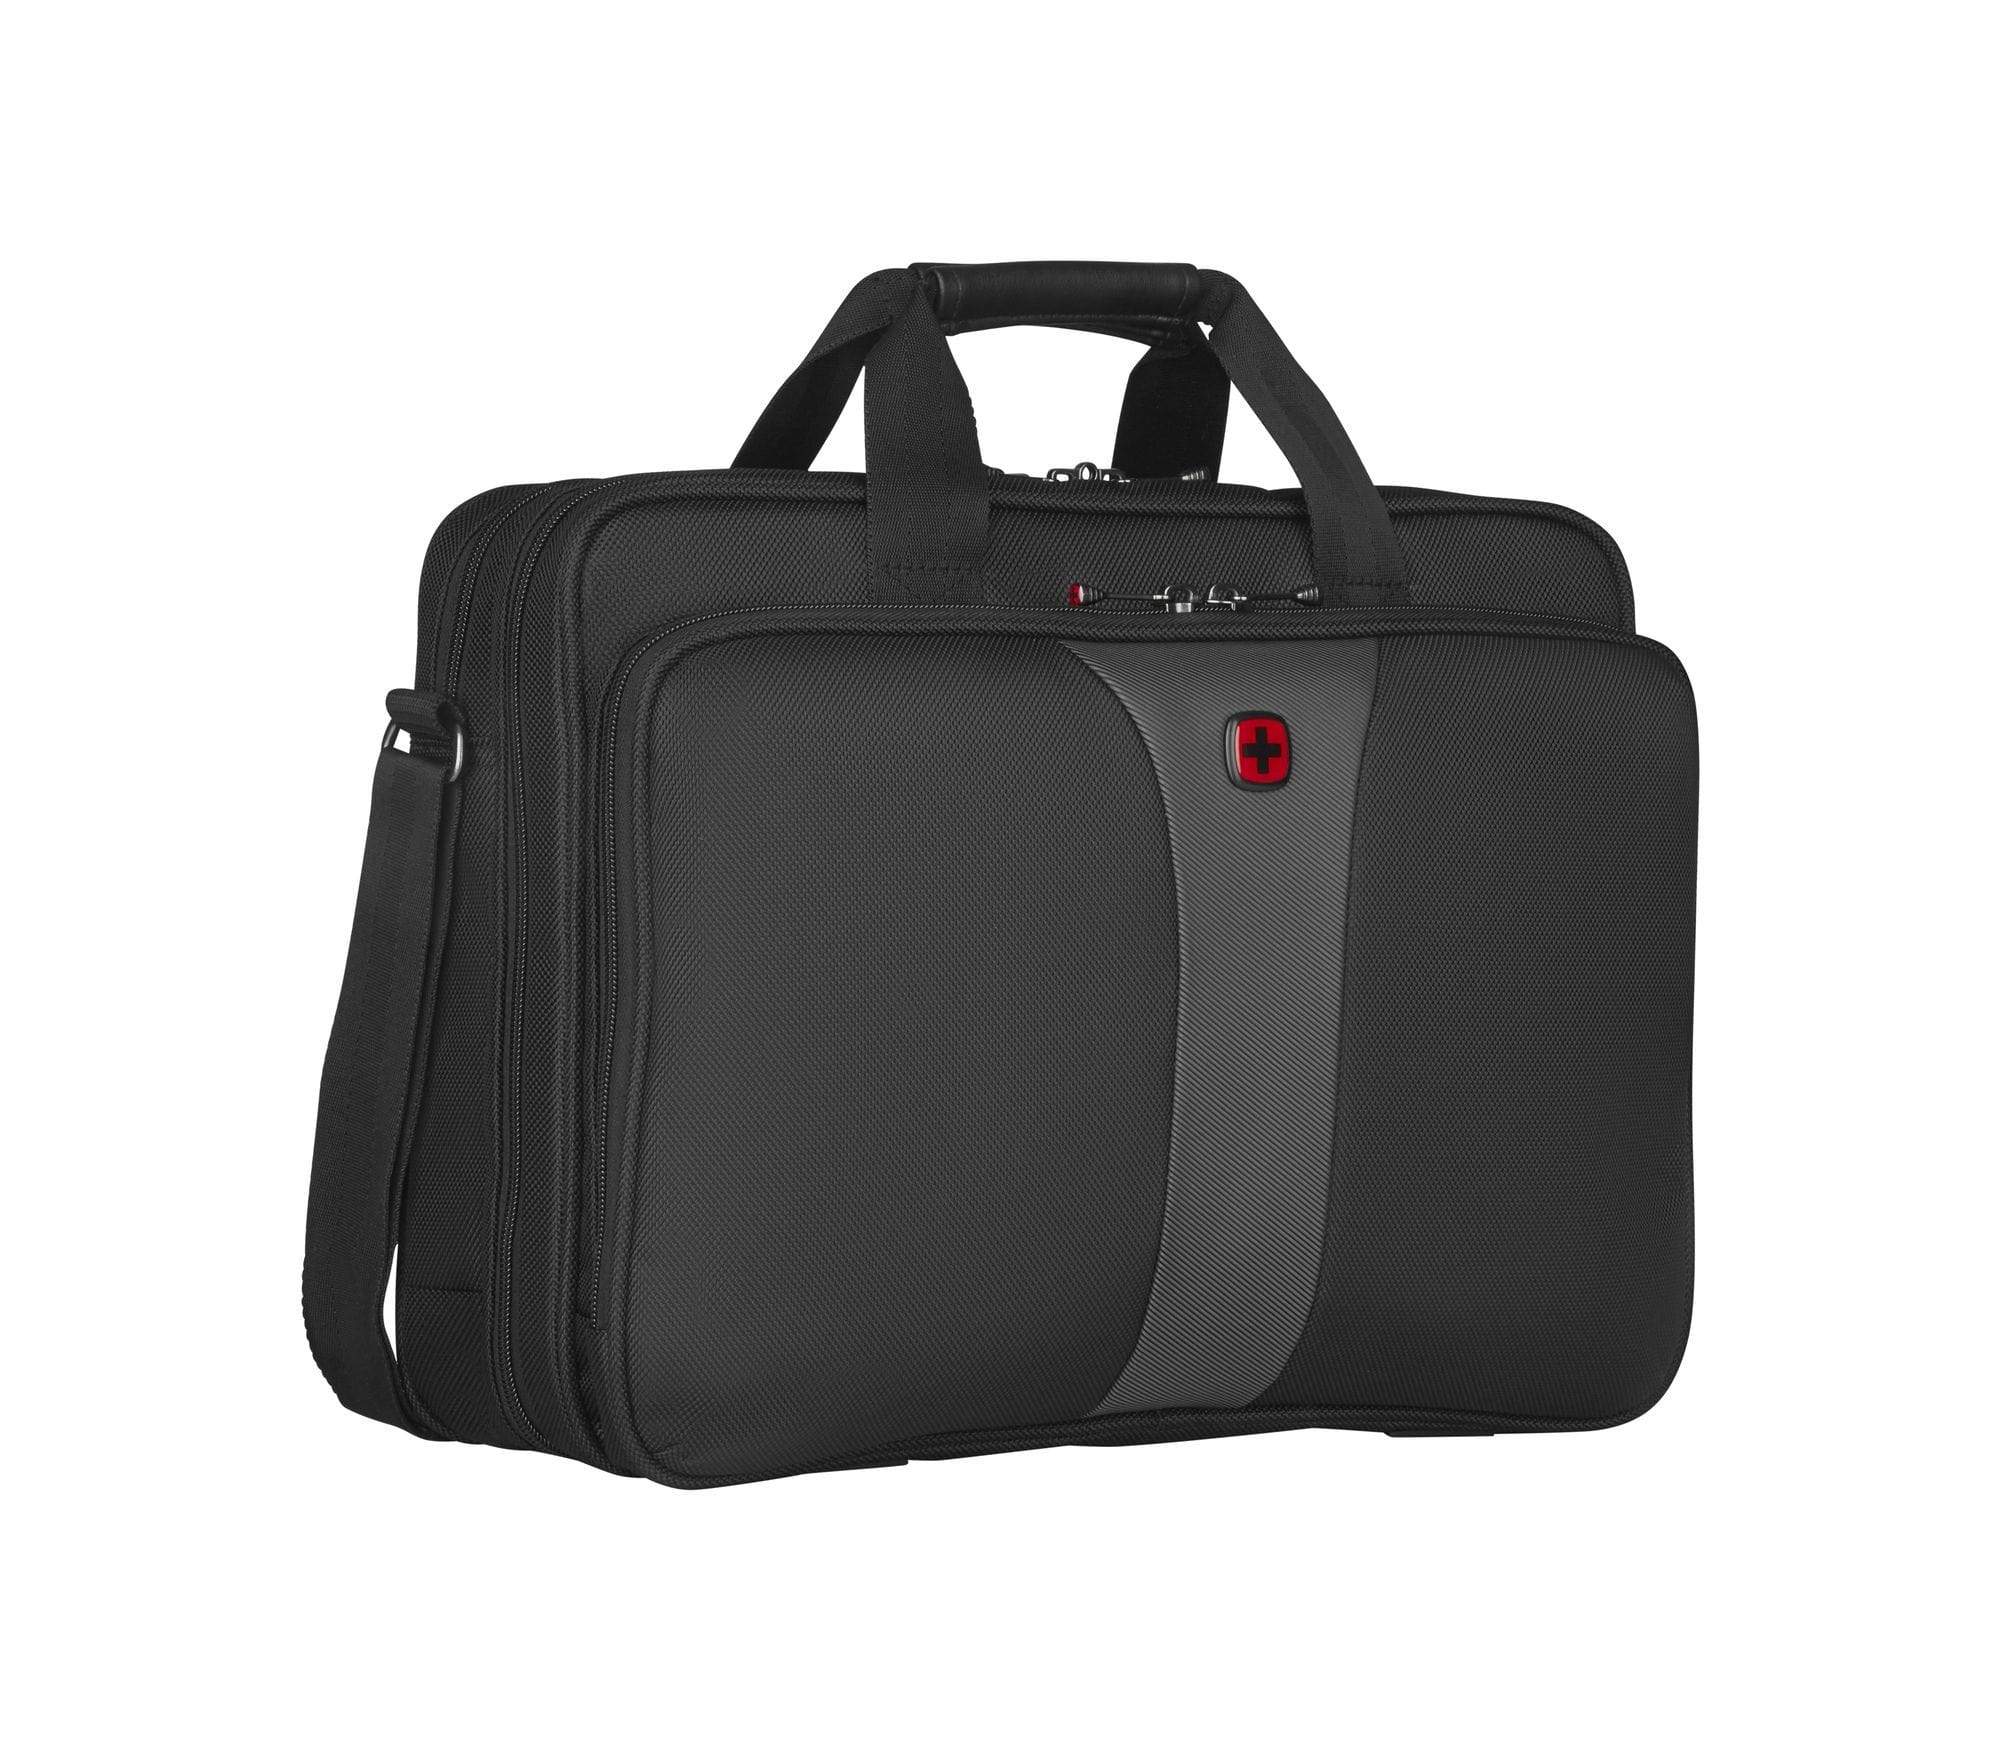 WENGER LEGACY 16 DOUBLE-GUSSET COMPUTER BRIEFCASE BLACK/GREY - 600648